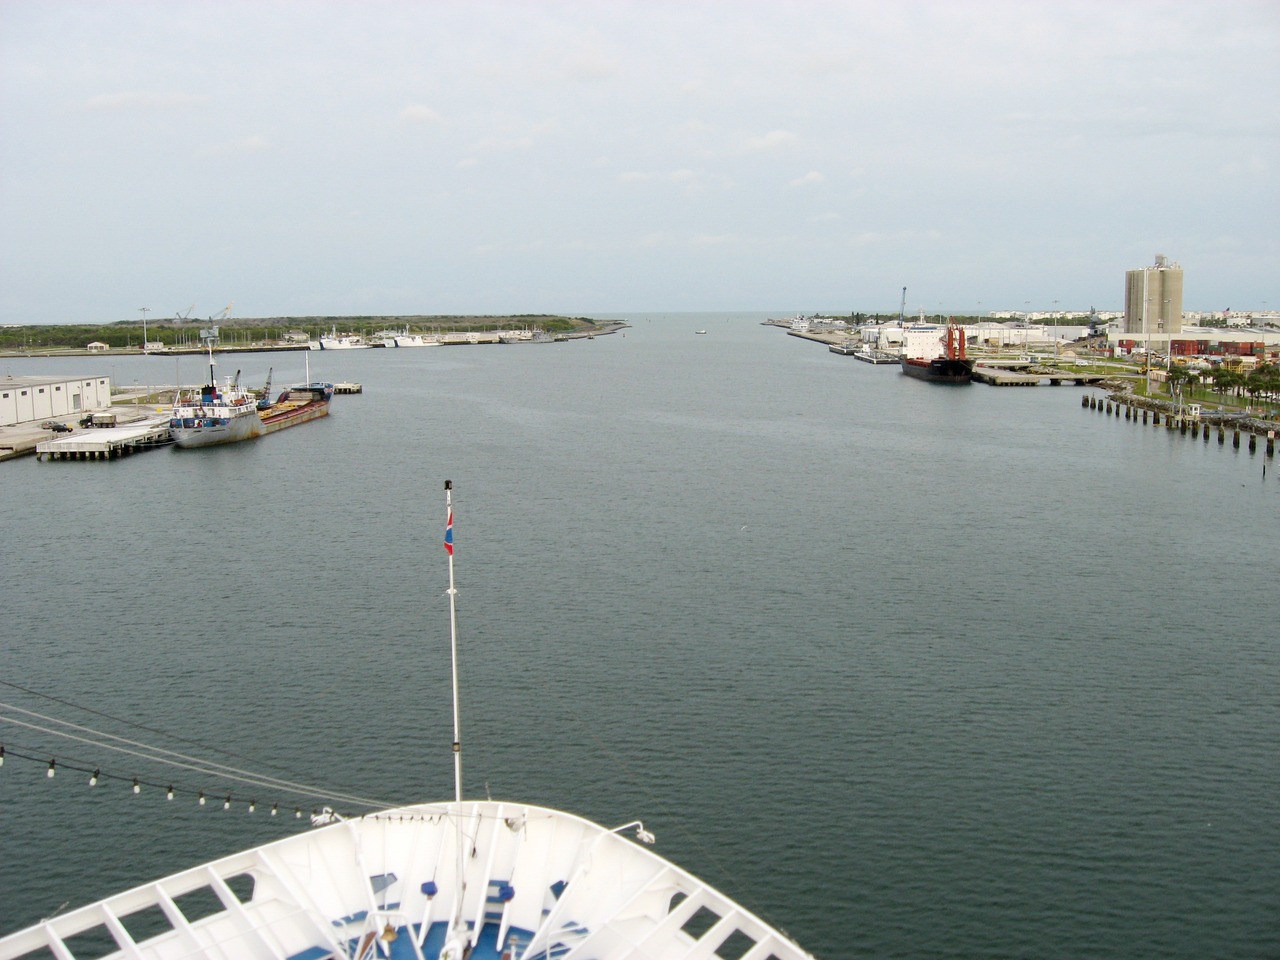 Heading out through the Canaveral Barge Canal, seen from the Deck 11 forward lookout above the bridge on Carnival Sensation.